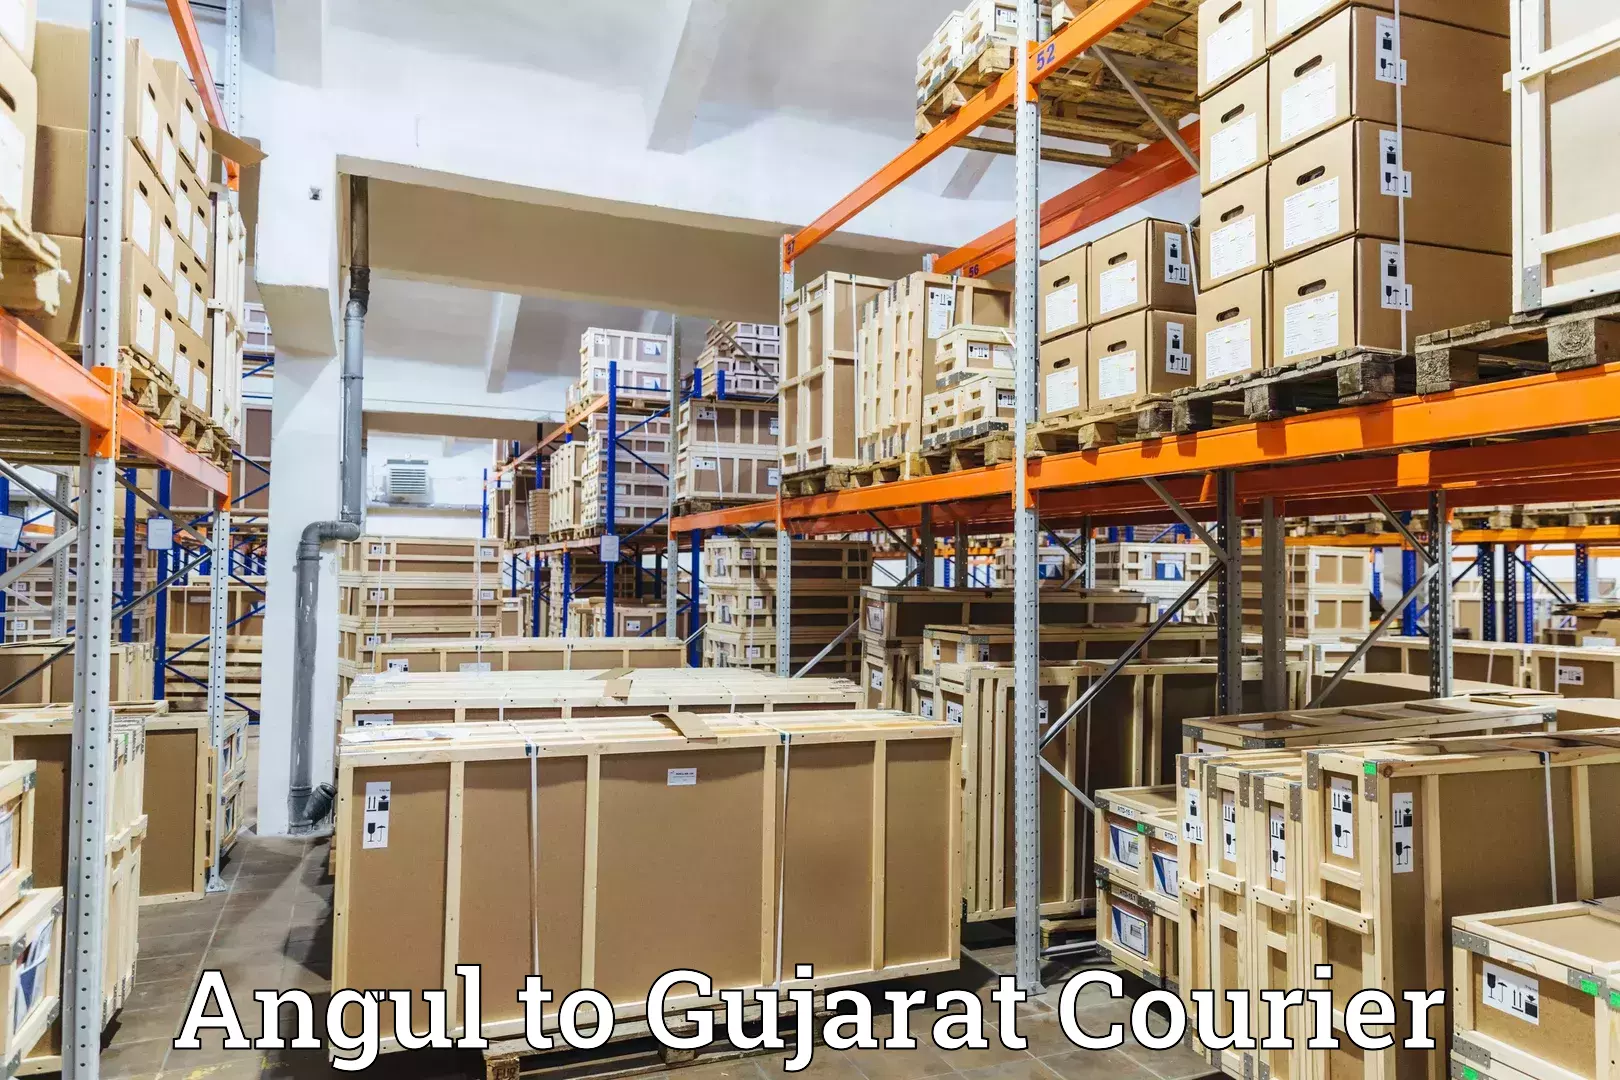 Residential courier service Angul to Kandla Port